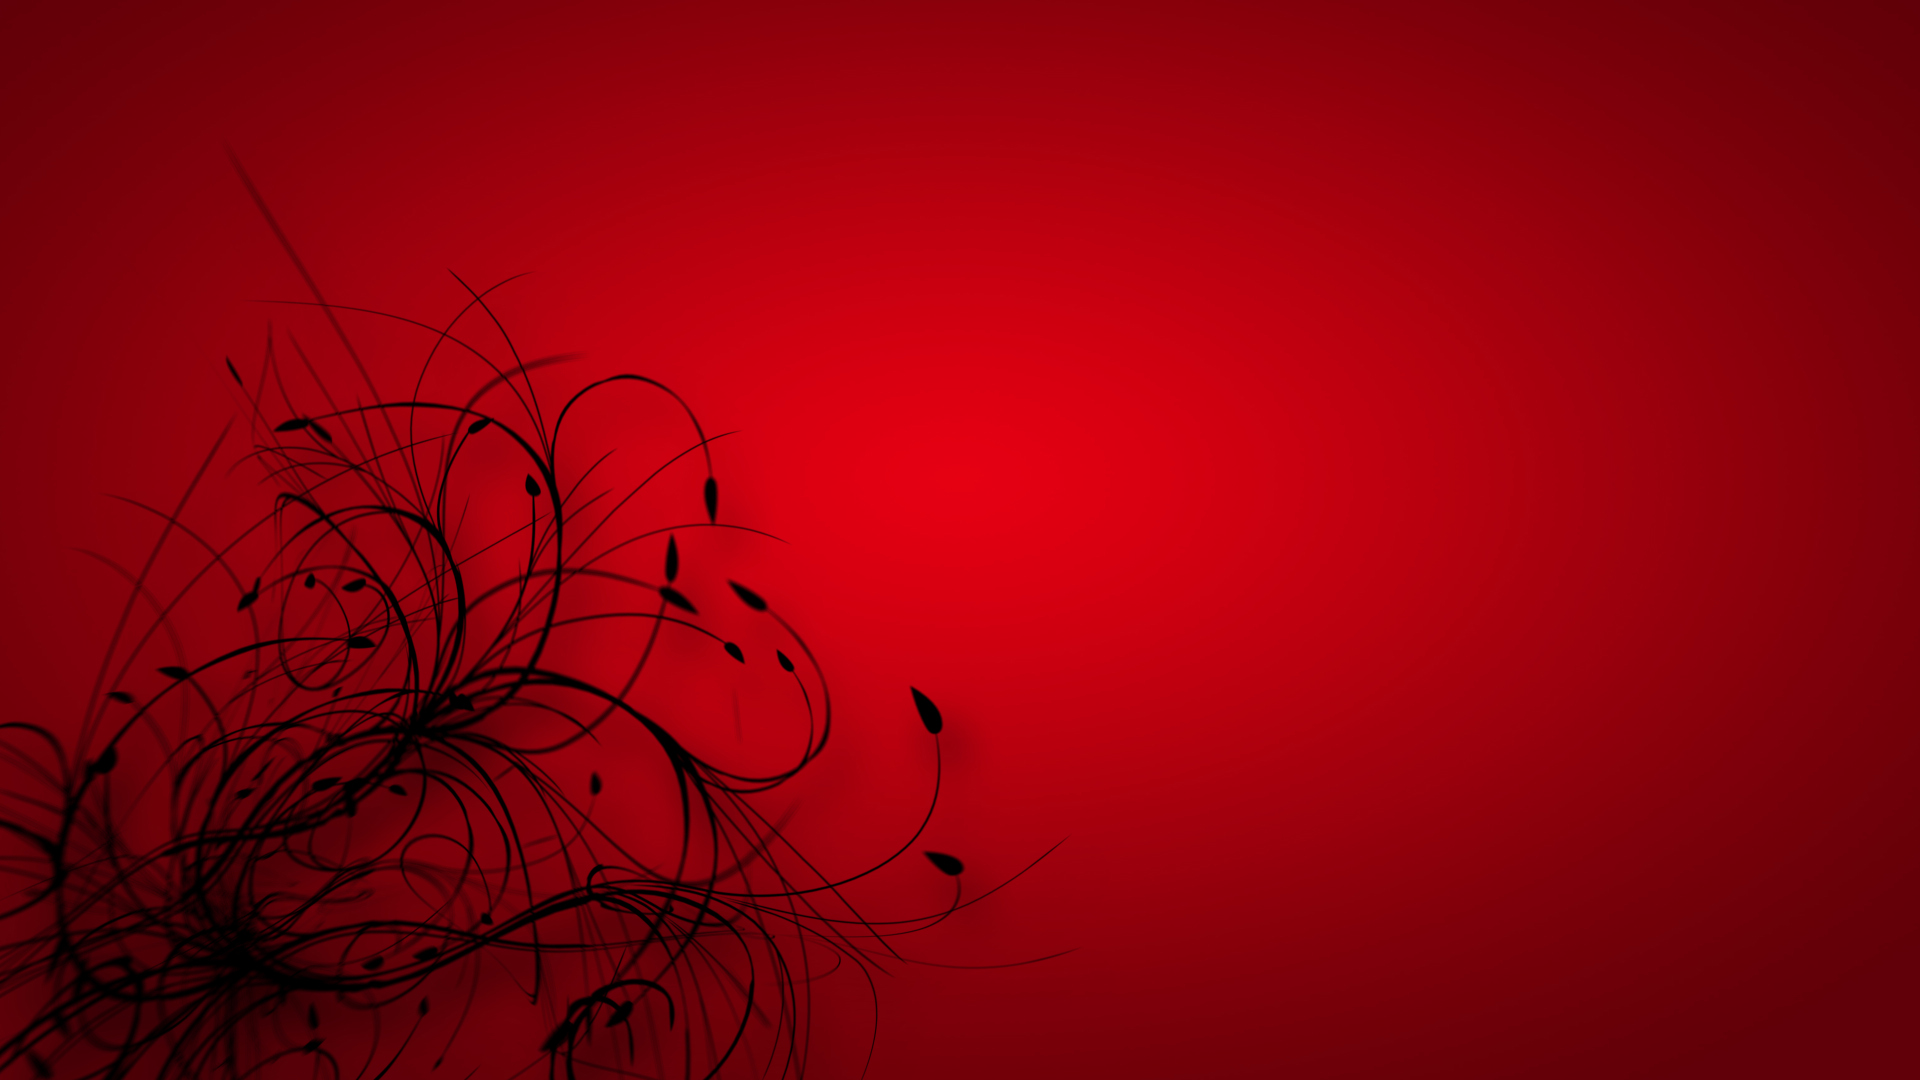 Download HD Red Wallpaper For Desktop And Mobile